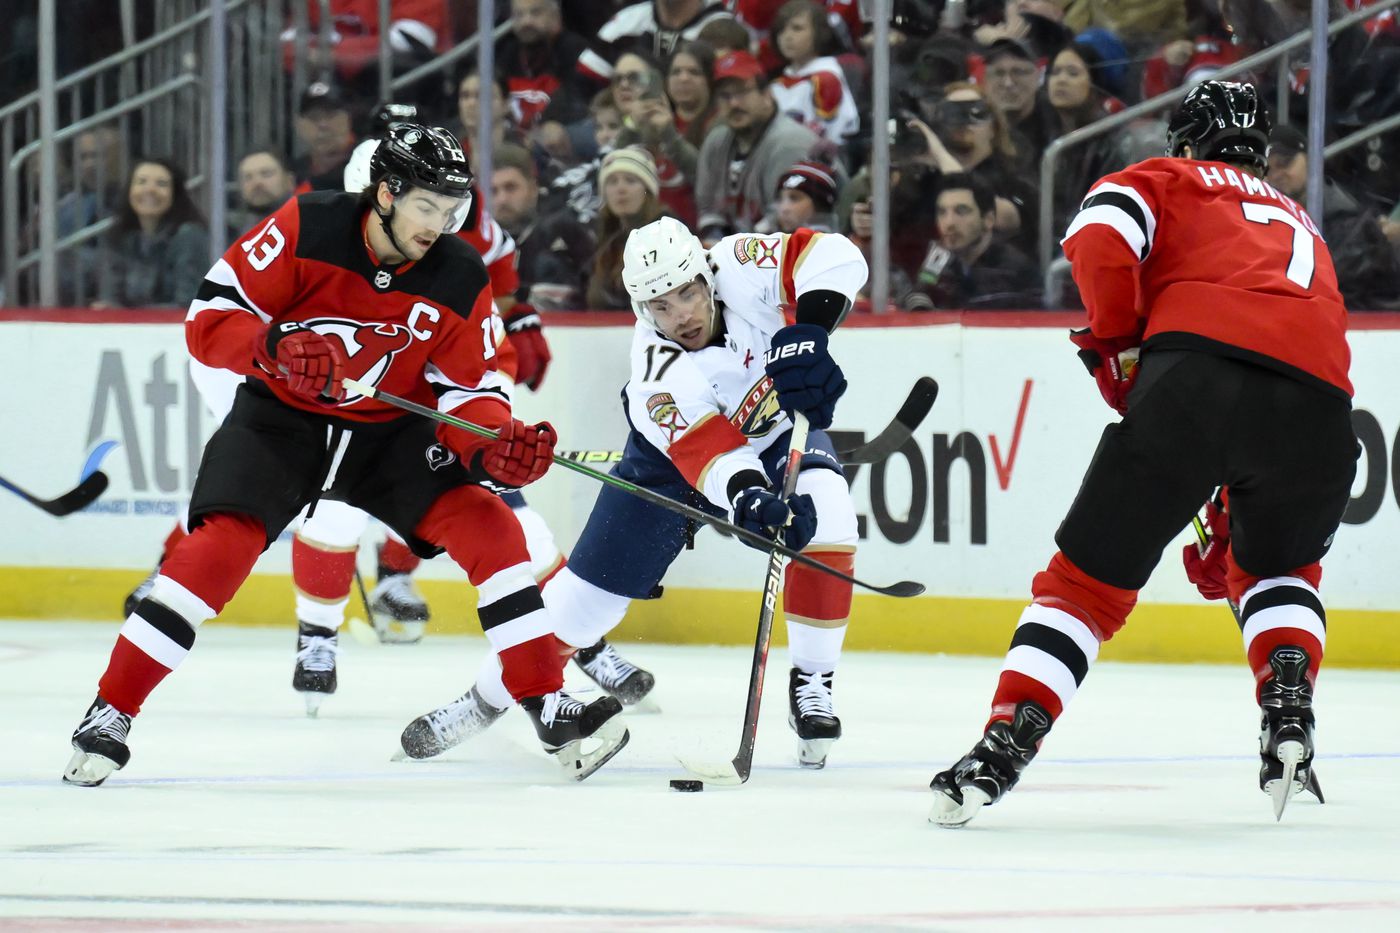 NHL Odds, Preview, Prediction: Panthers vs Devils (Monday, October 16)